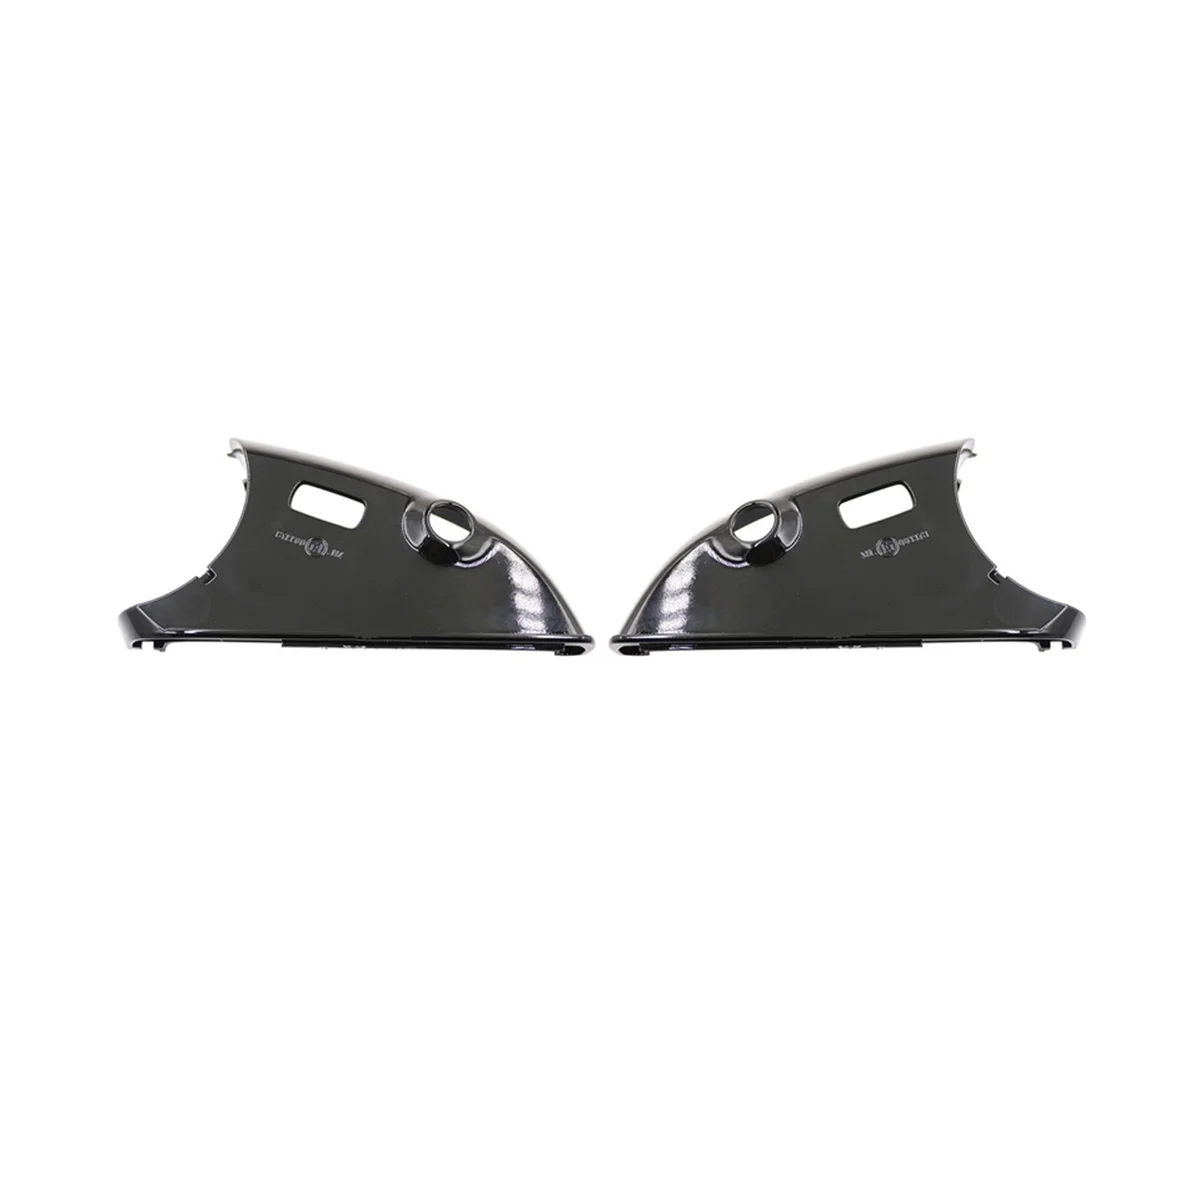 2pcs-car-rearview-side-mirror-bottom-lower-holder-for-mercedes-benz-w212-2009-2015-s-cl-w221-2009-2013-glk-2012-2015